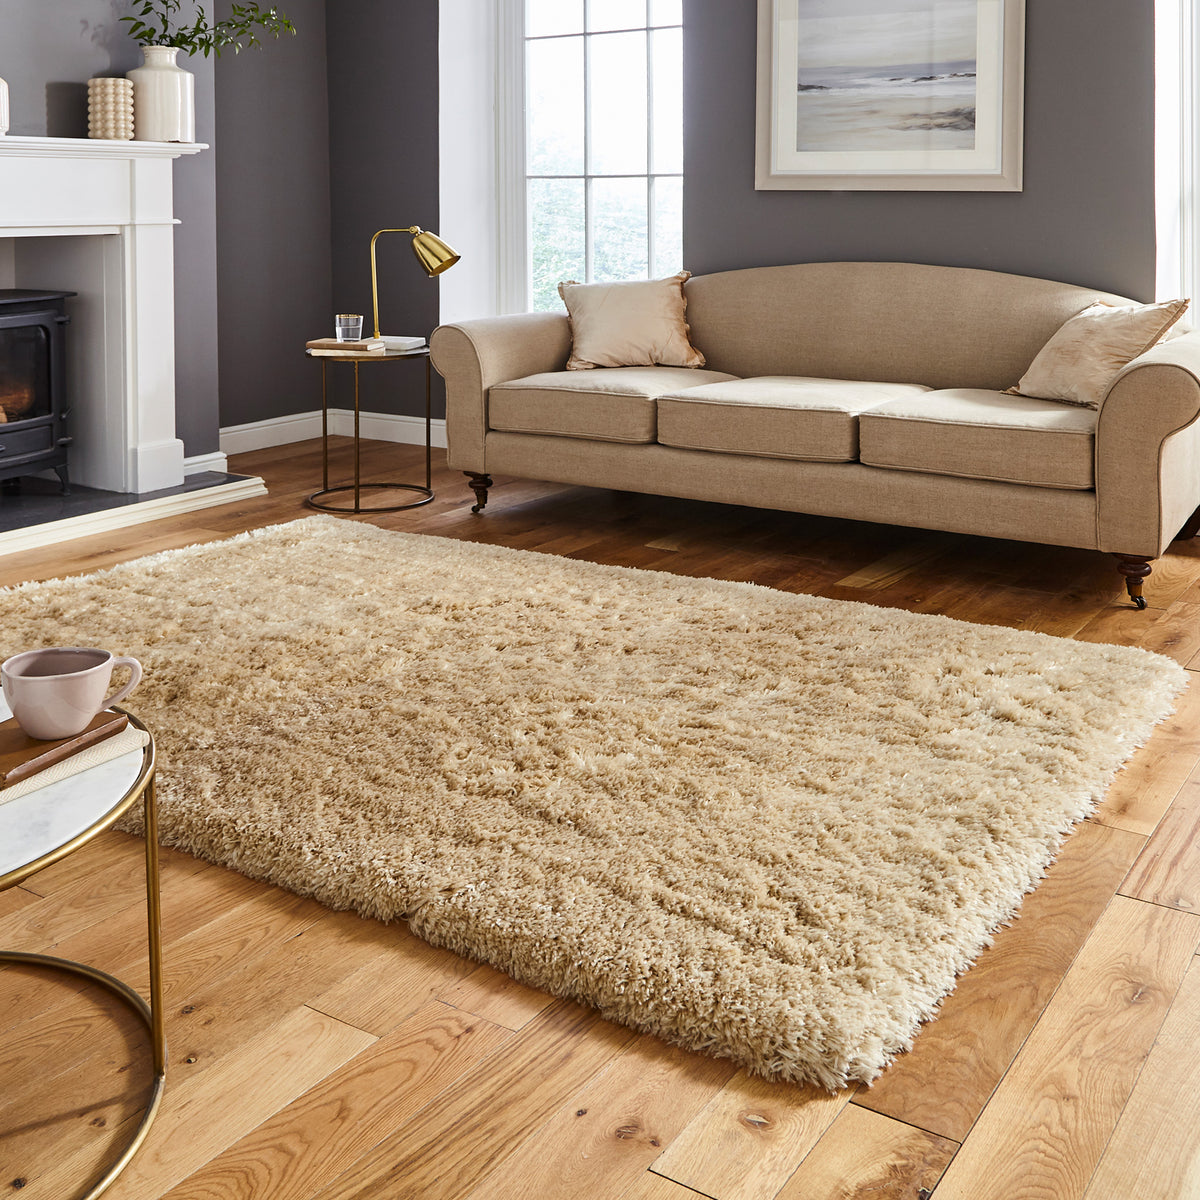 Hatton Beige Hand Tufted Shaggy Rug for living room